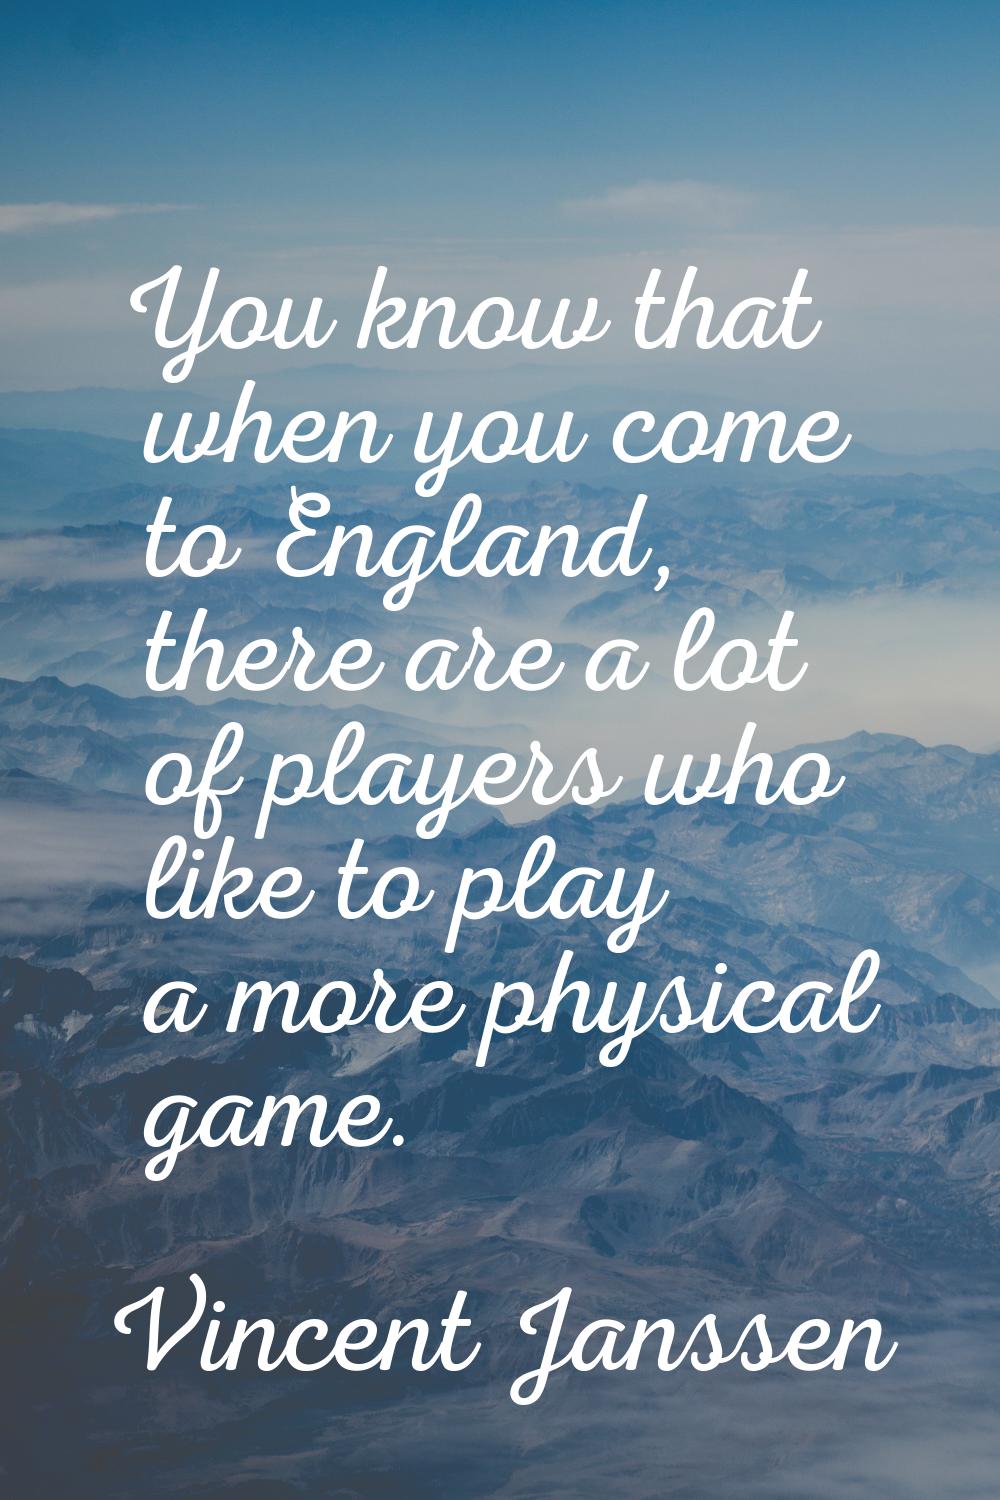 You know that when you come to England, there are a lot of players who like to play a more physical